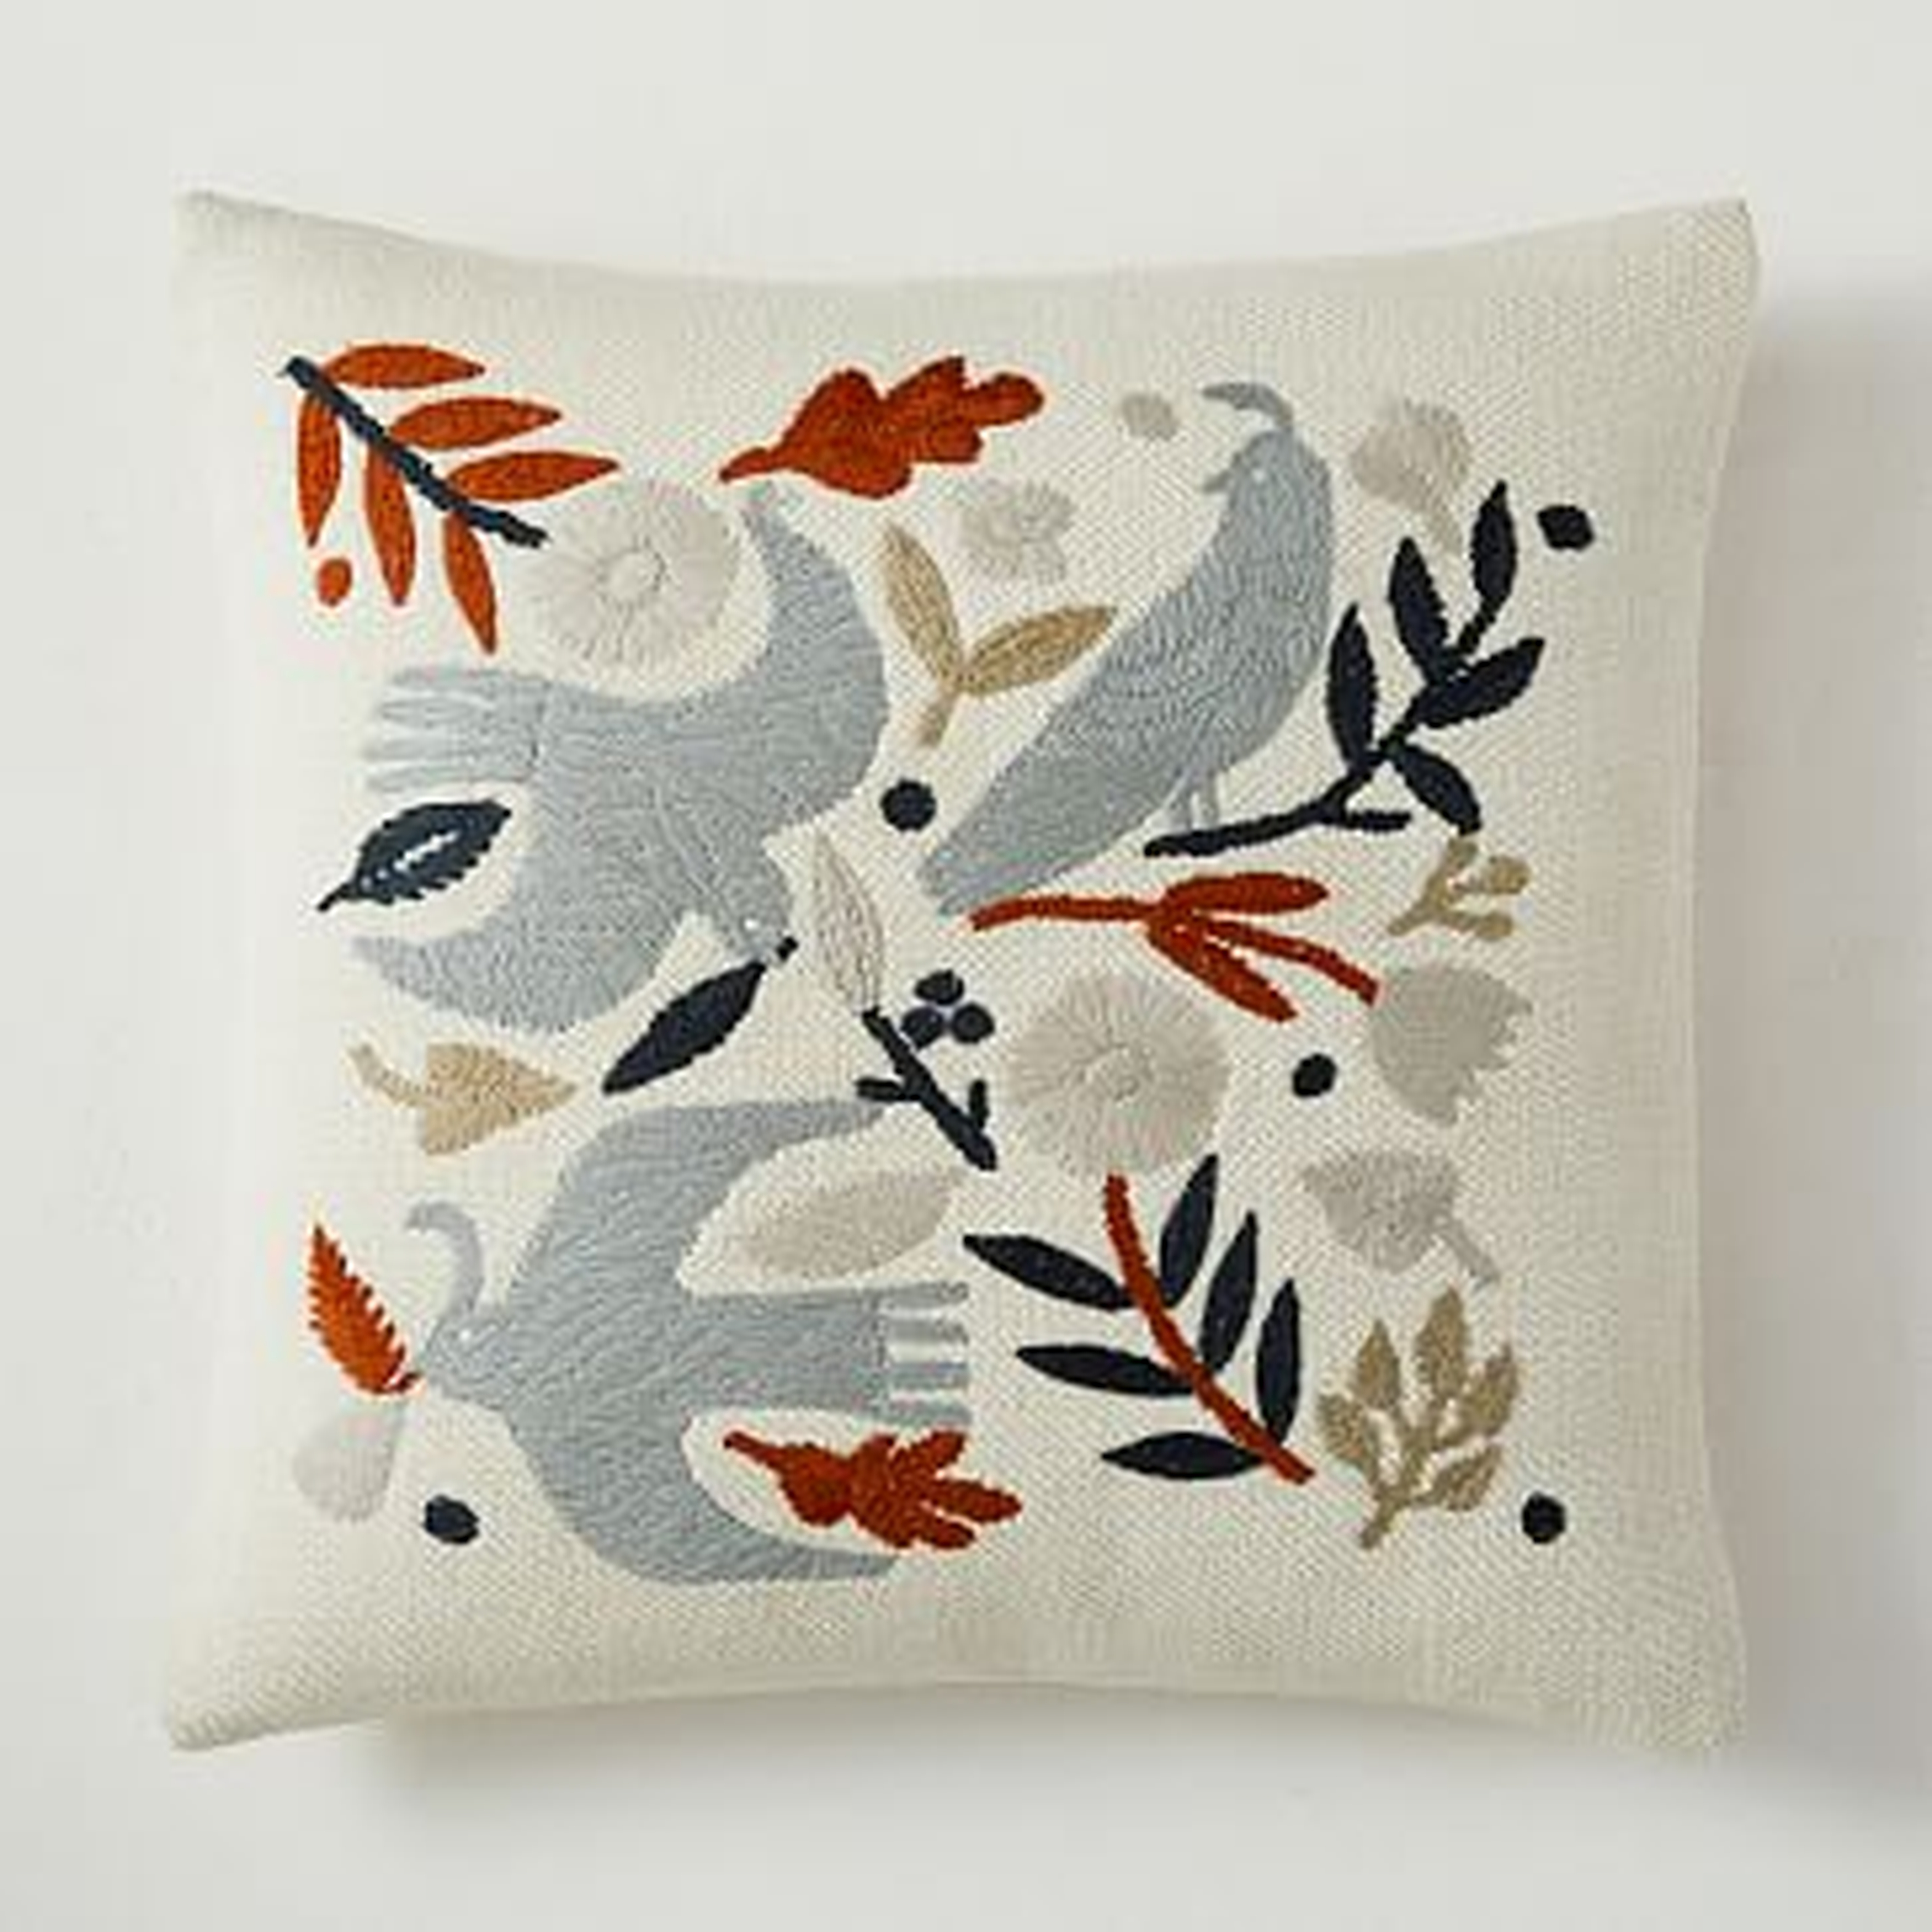 Embroidered Birds Pillow Cover, 18"x18", Alabaster - West Elm